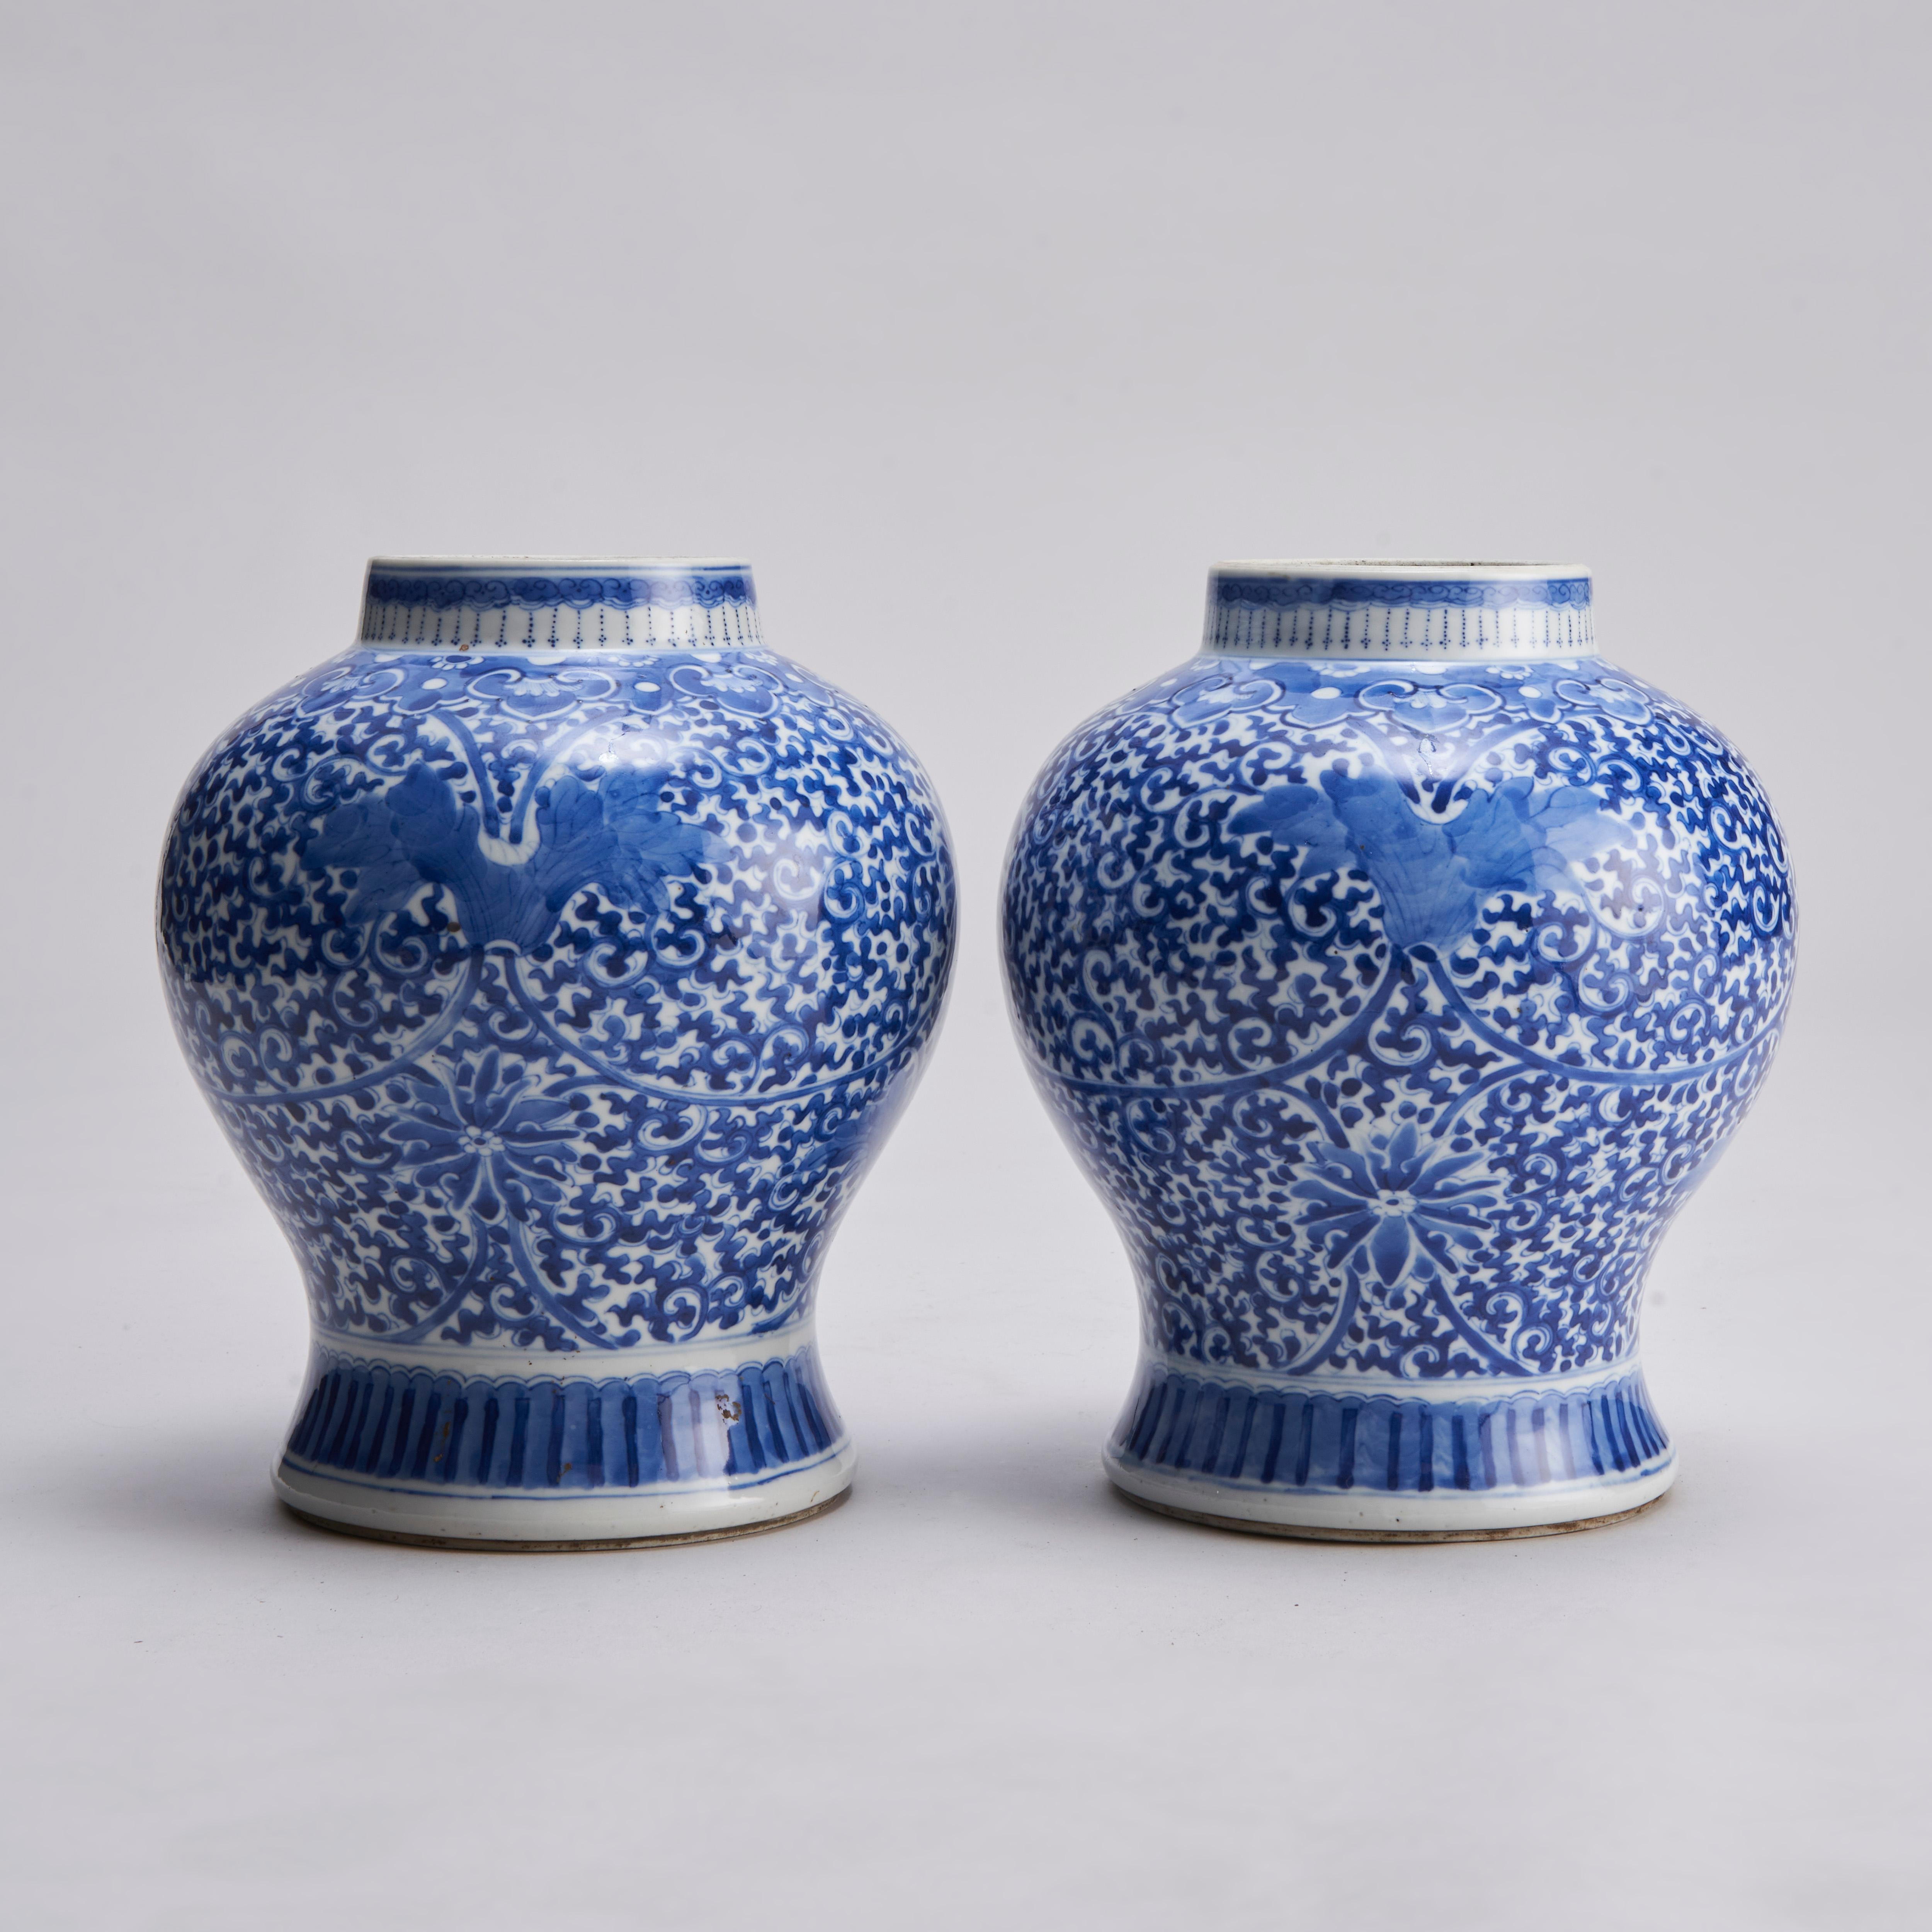 A pair of 19th century Chinese blue and white vases with a complex floral design depicting Clematis flowers on a dense foliate back gound. Ruyi head pattern to the shoulder of the vase.

Contact us for further information or to arrange a viewing.